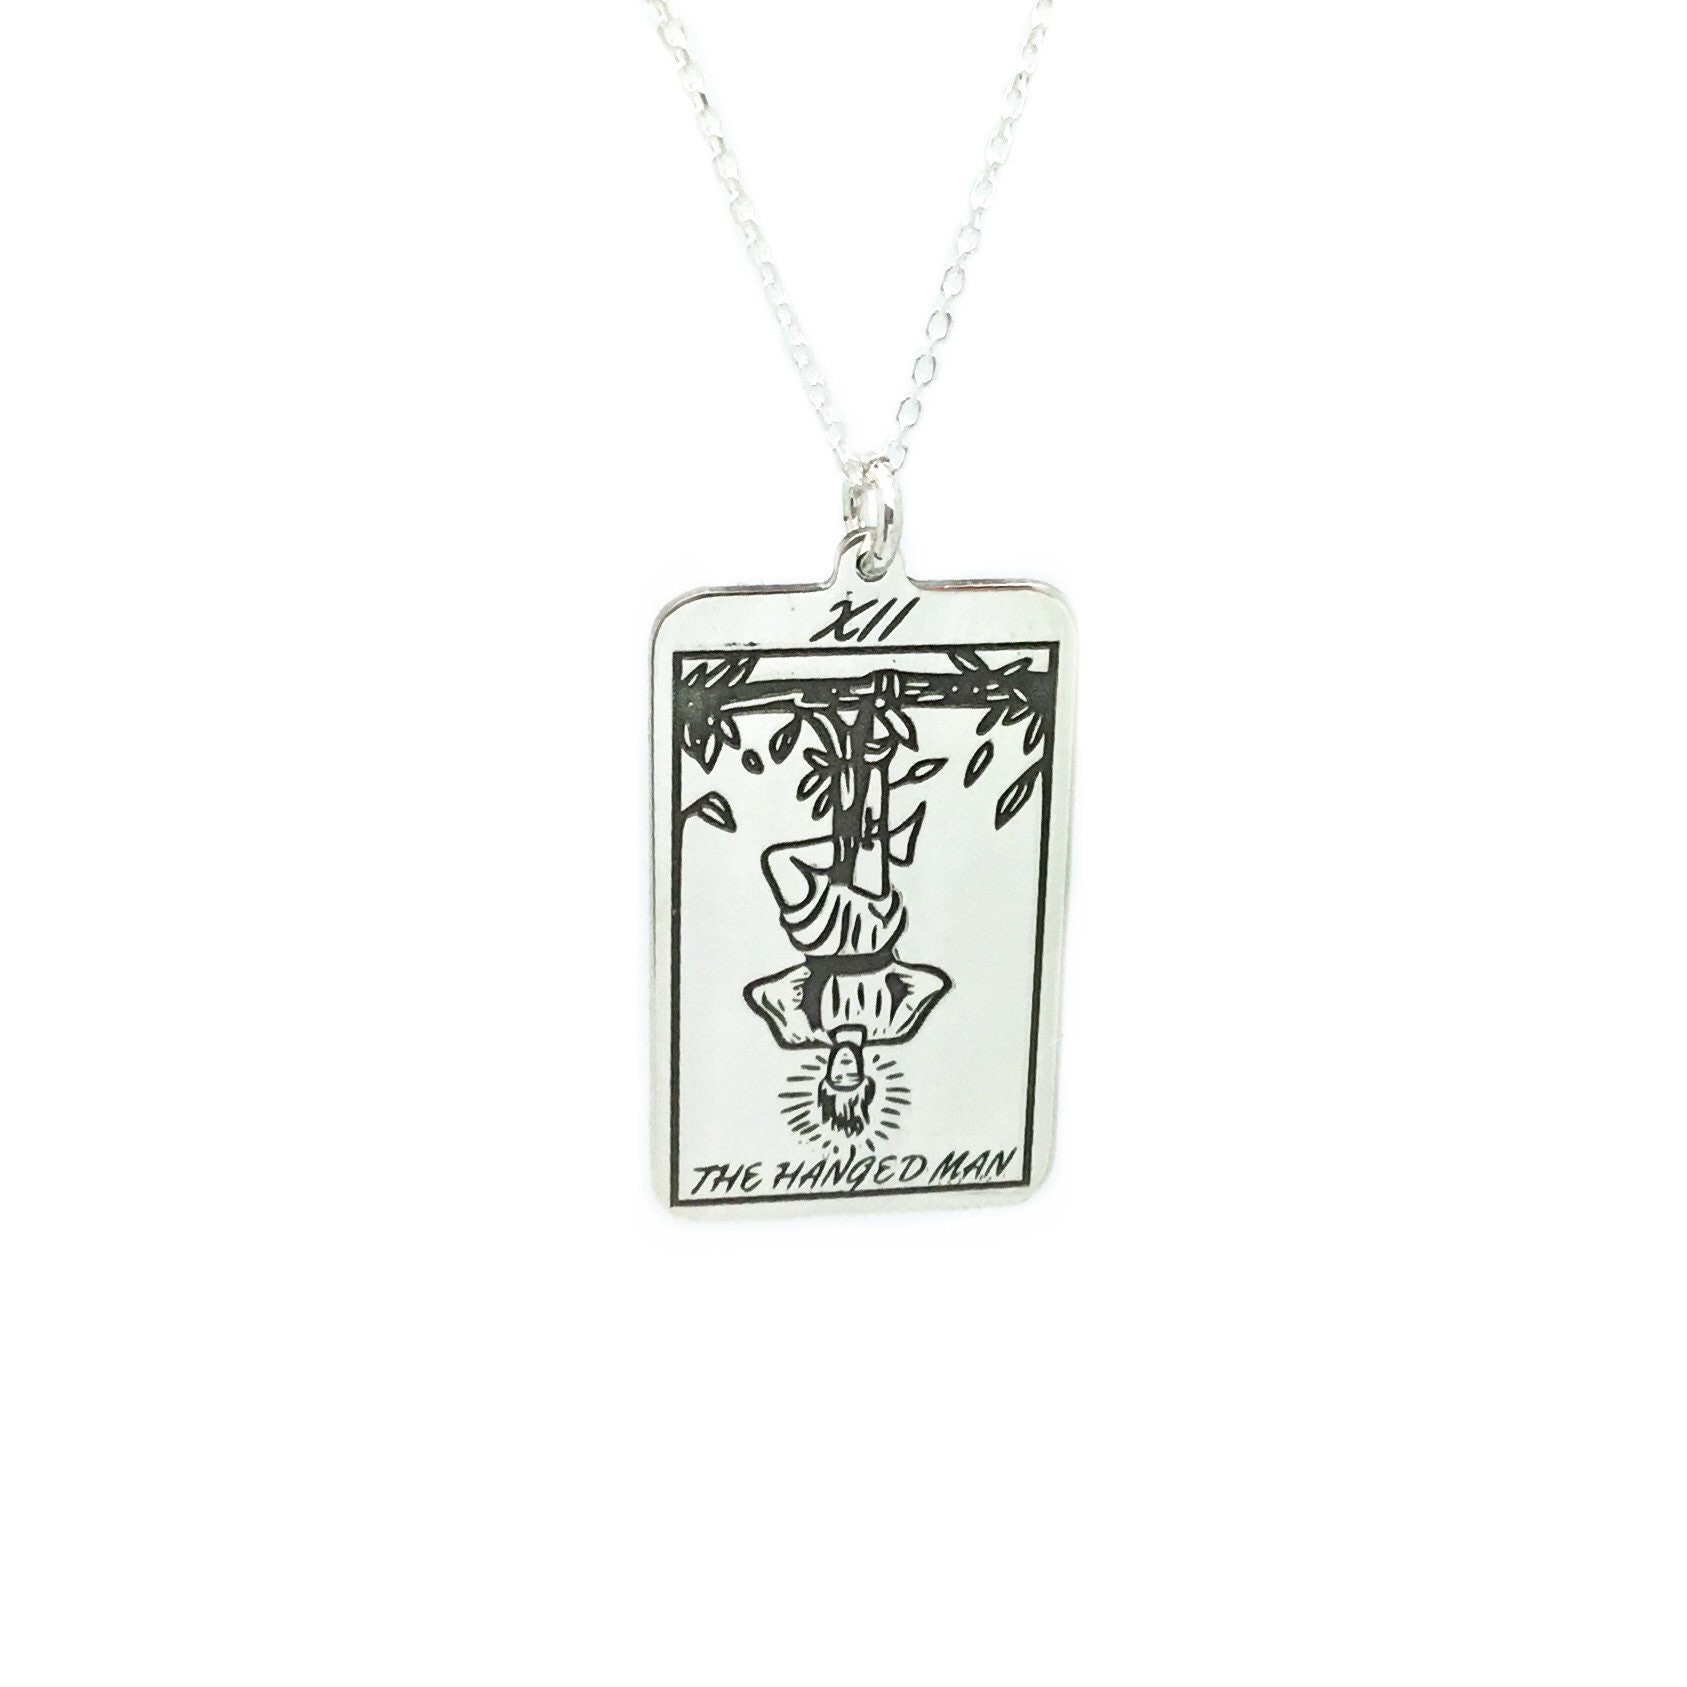 Hanged Man Tarot Card Necklace Chain Charm Sterling Silver - Etsy